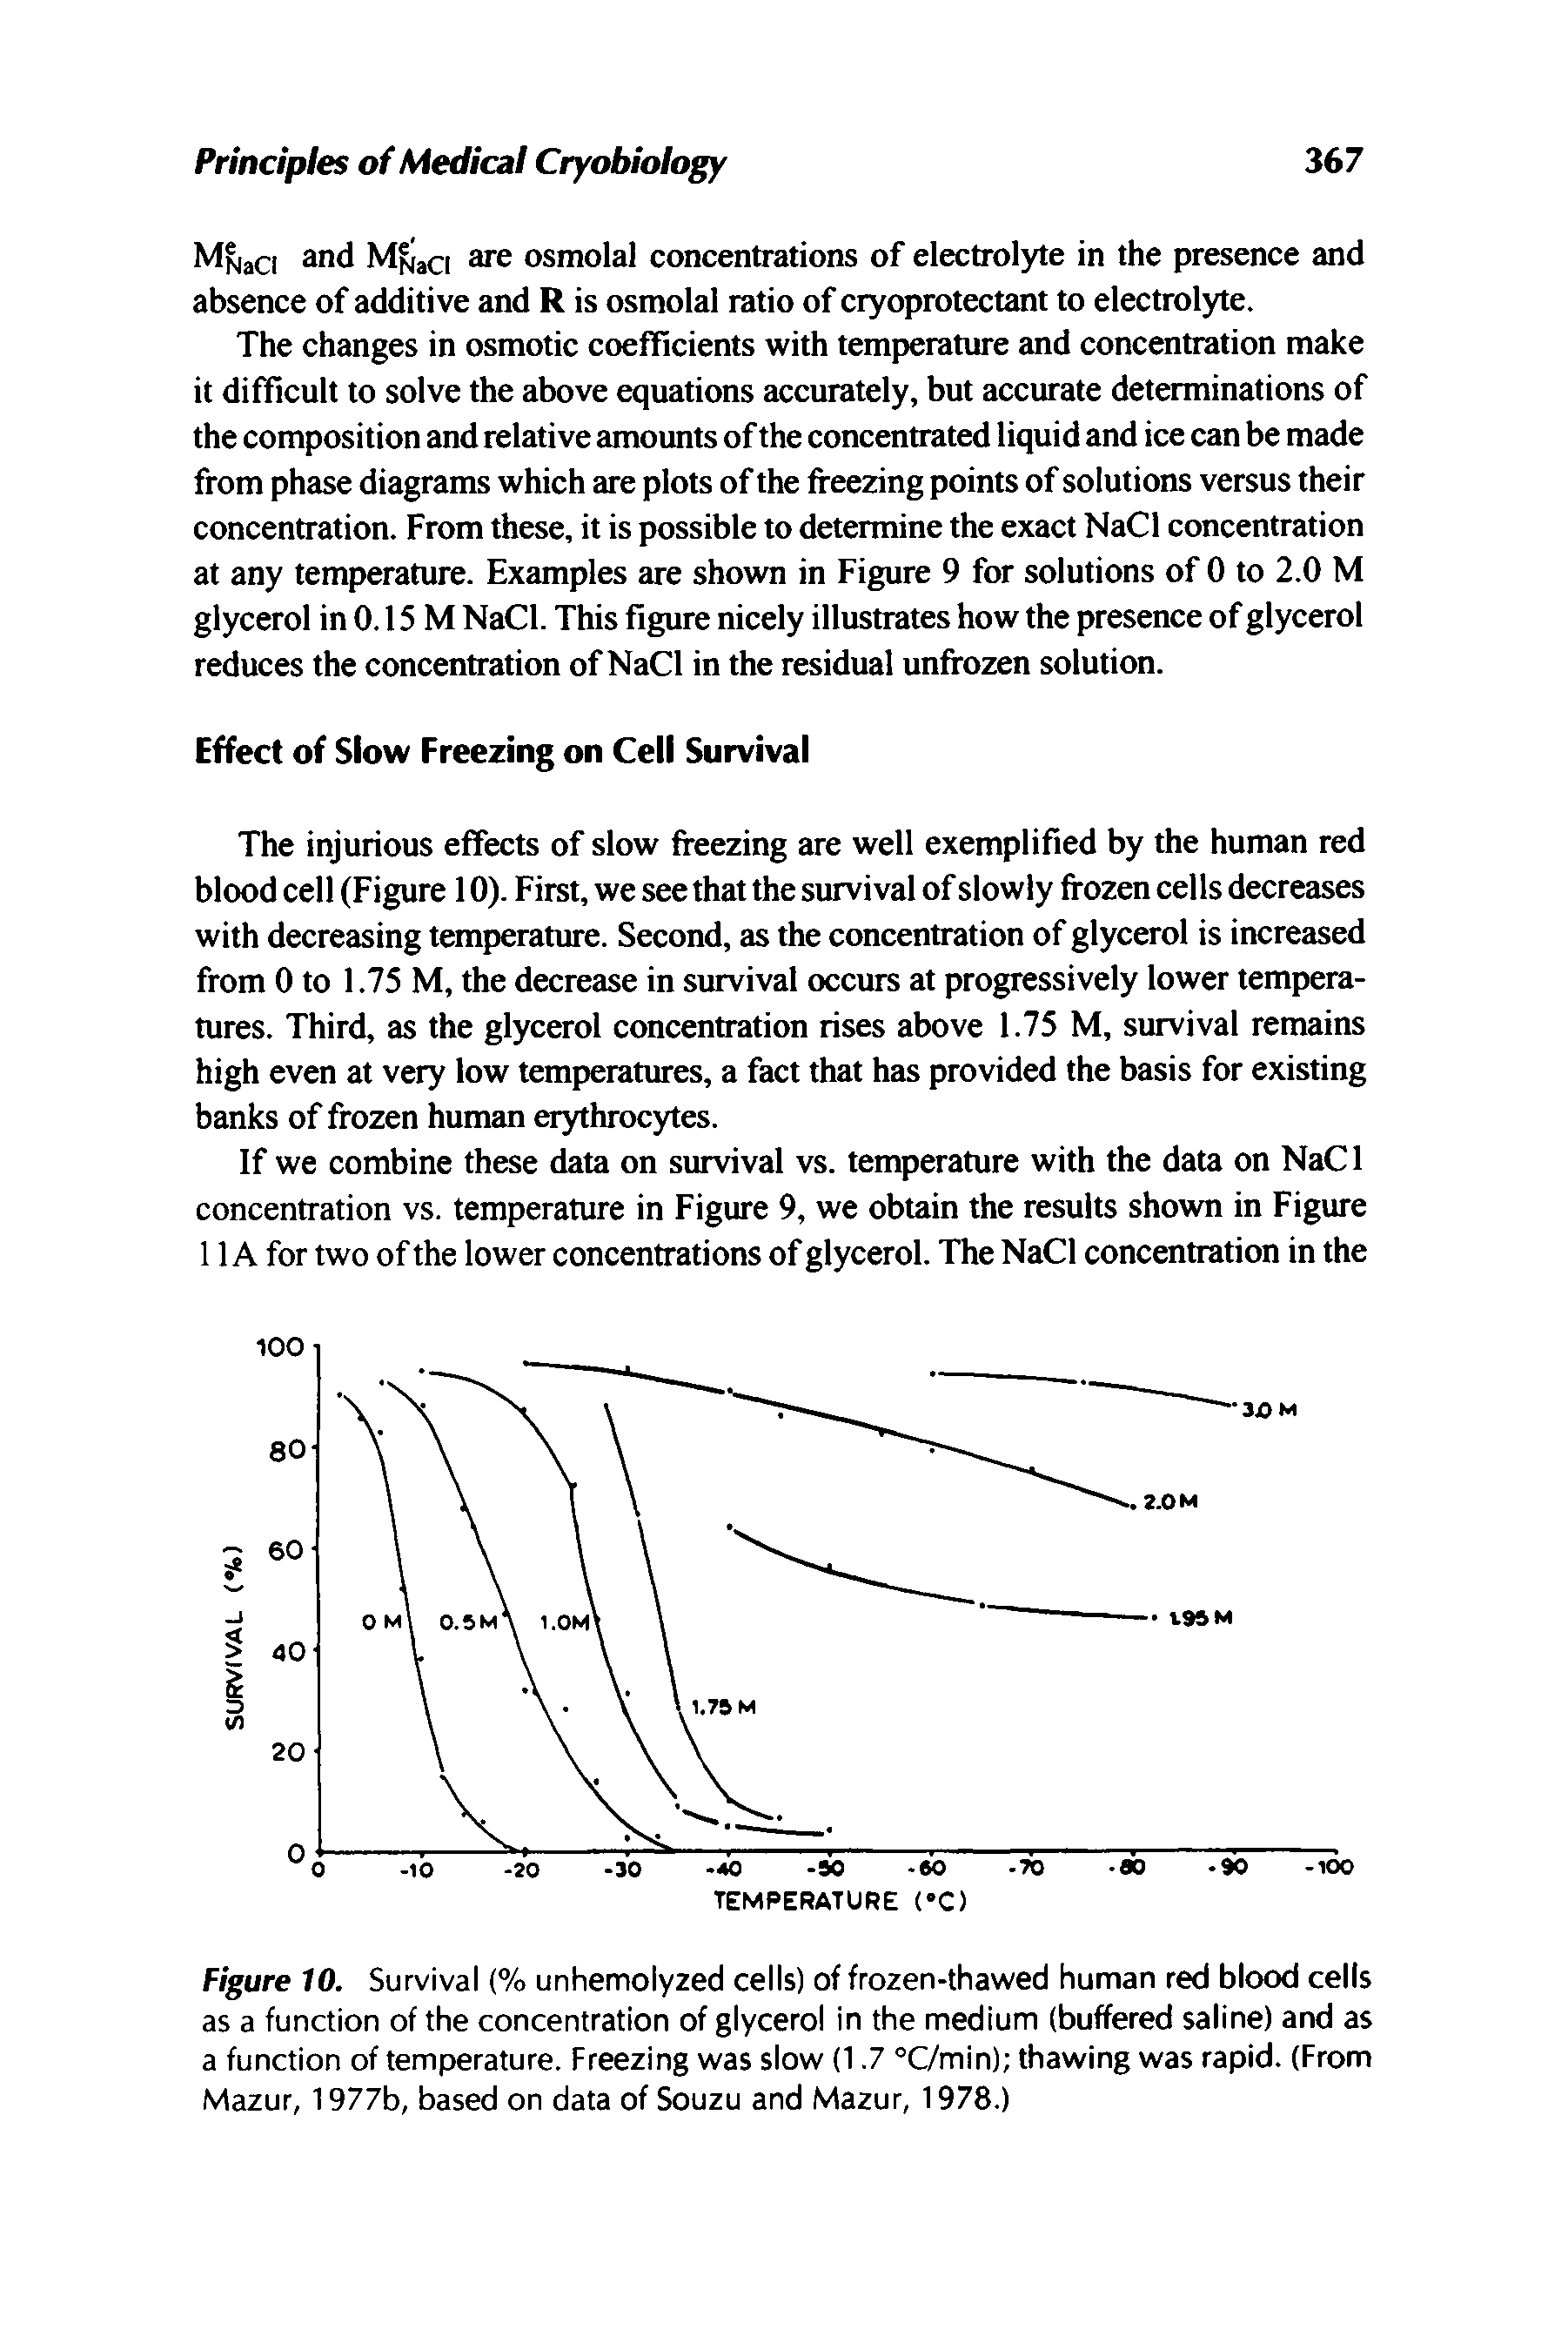 Figure 10. Survival (% unhemolyzed cells) of frozen-thawed human red blood cells as a function of the concentration of glycerol in the medium (buffered saline) and as a function of temperature. Freezing was slow (1.7 °C/min) thawing was rapid. (From Mazur, 1977b, based on data of Souzu and Mazur, 1978.)...